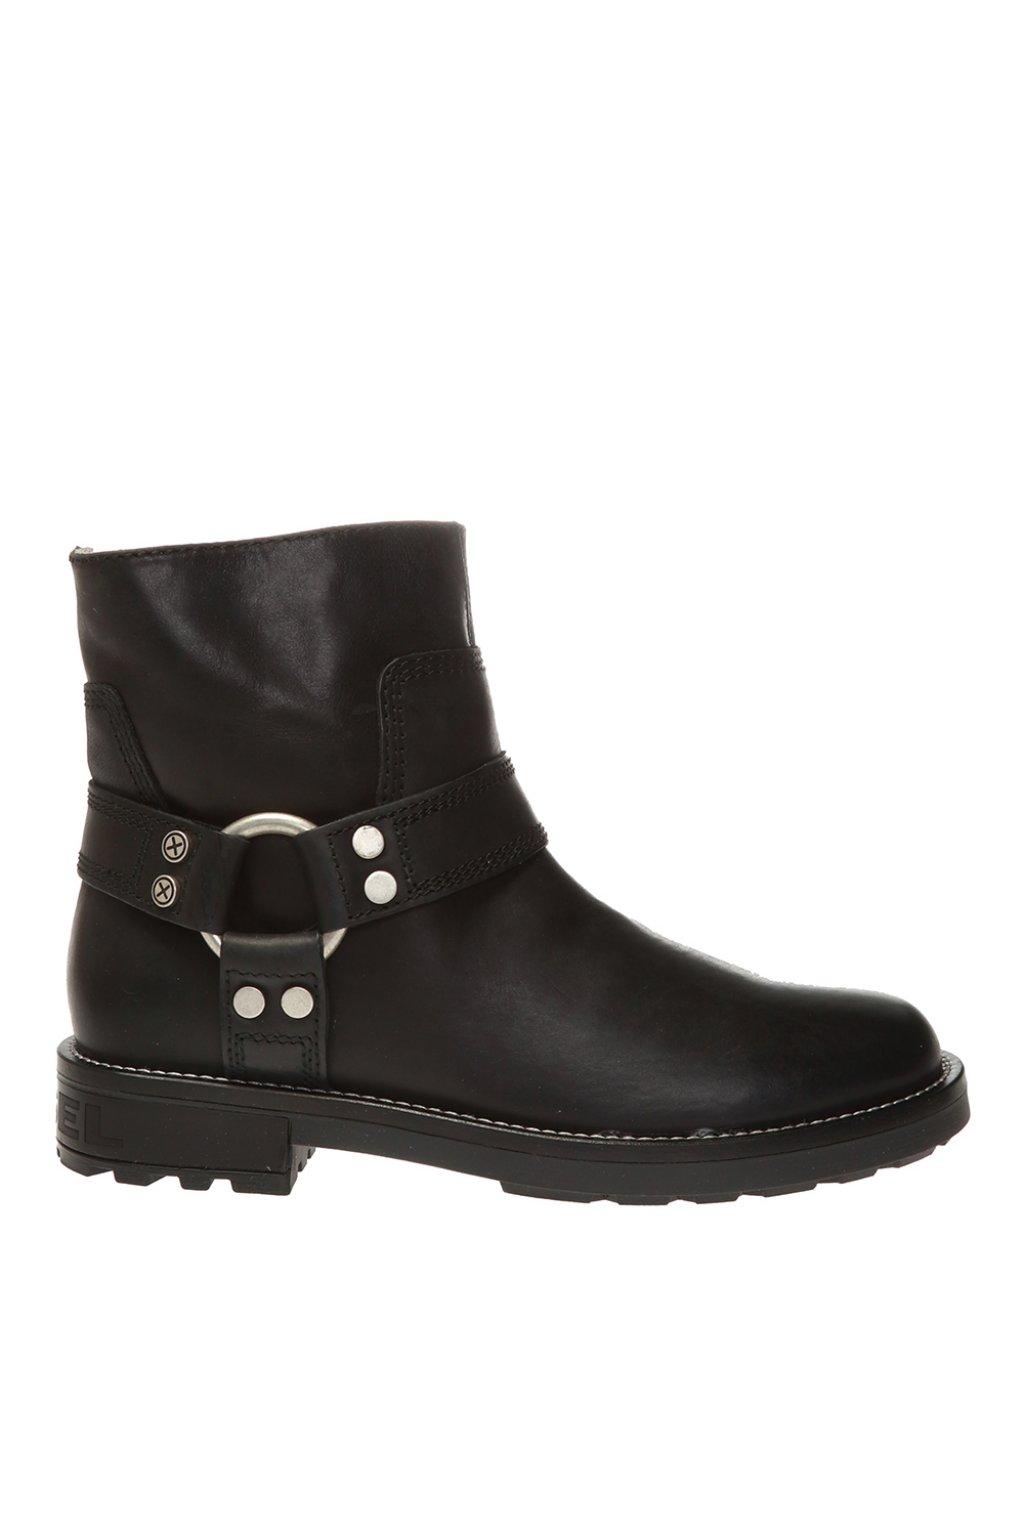 DIESEL 'd-throuper Ab' Leather Ankle Boots in Black - Lyst